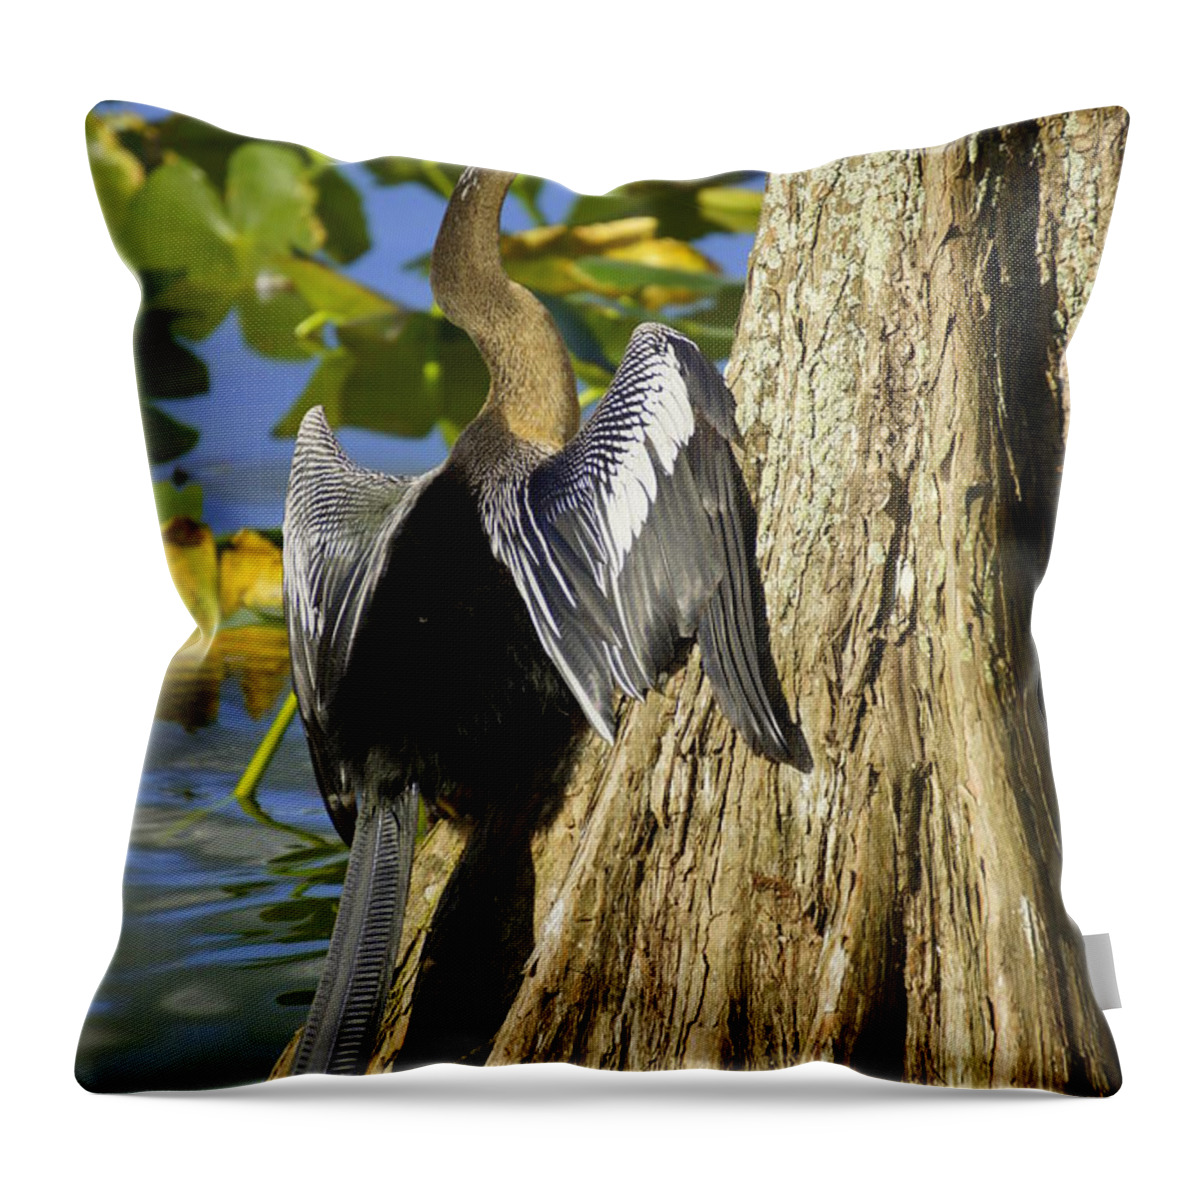 Ahninga Throw Pillow featuring the photograph Cypress Bird by Laurie Perry